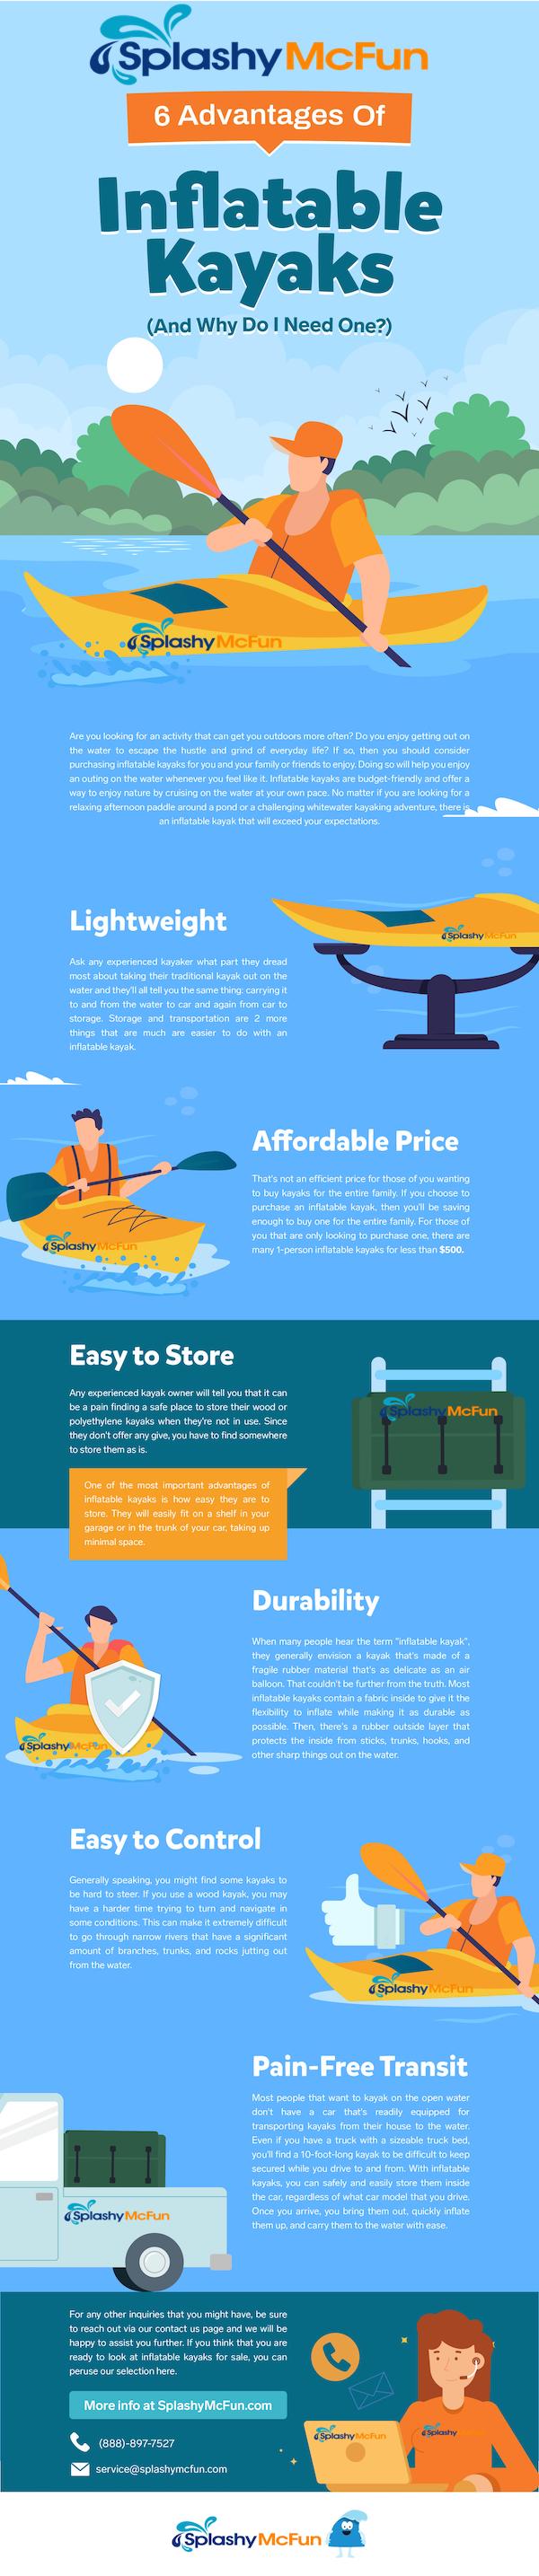 6 Advantages of Inflatable Kayaks Infographic